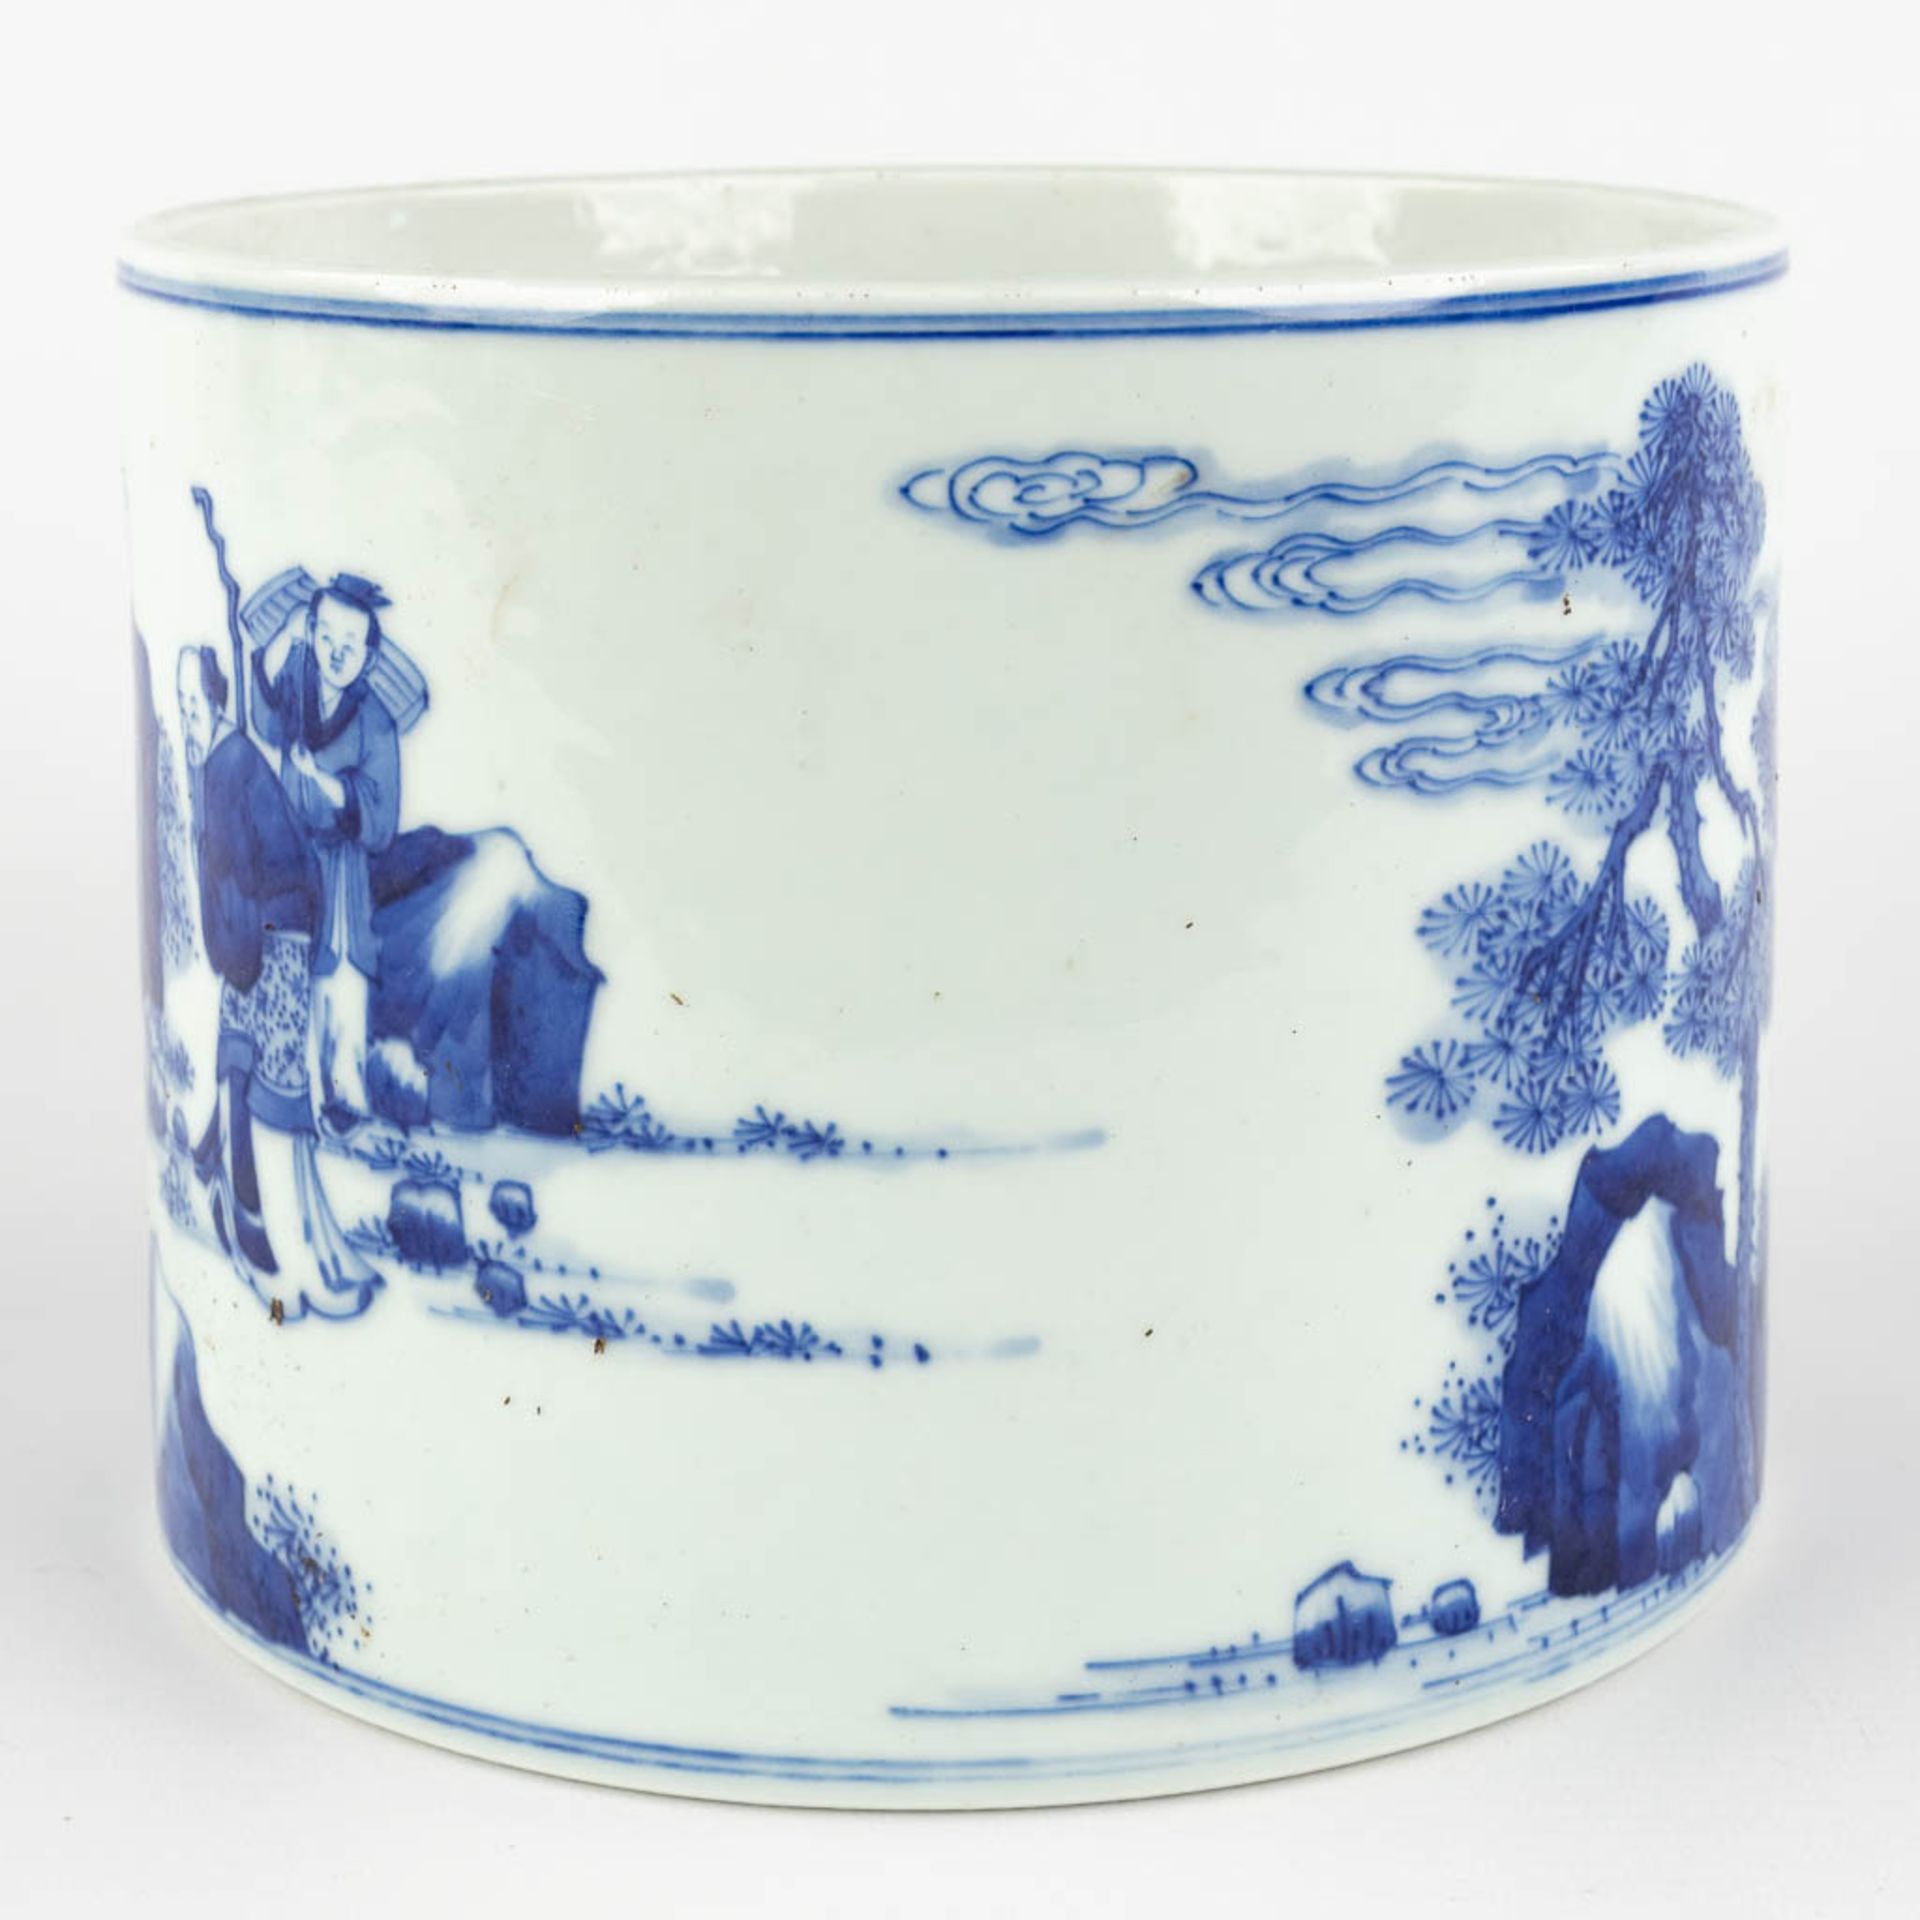 A Chinese pot, blue-white decor of wise men holding a cloth, 19th C. (H:15,5 x D:20 cm) - Image 6 of 12